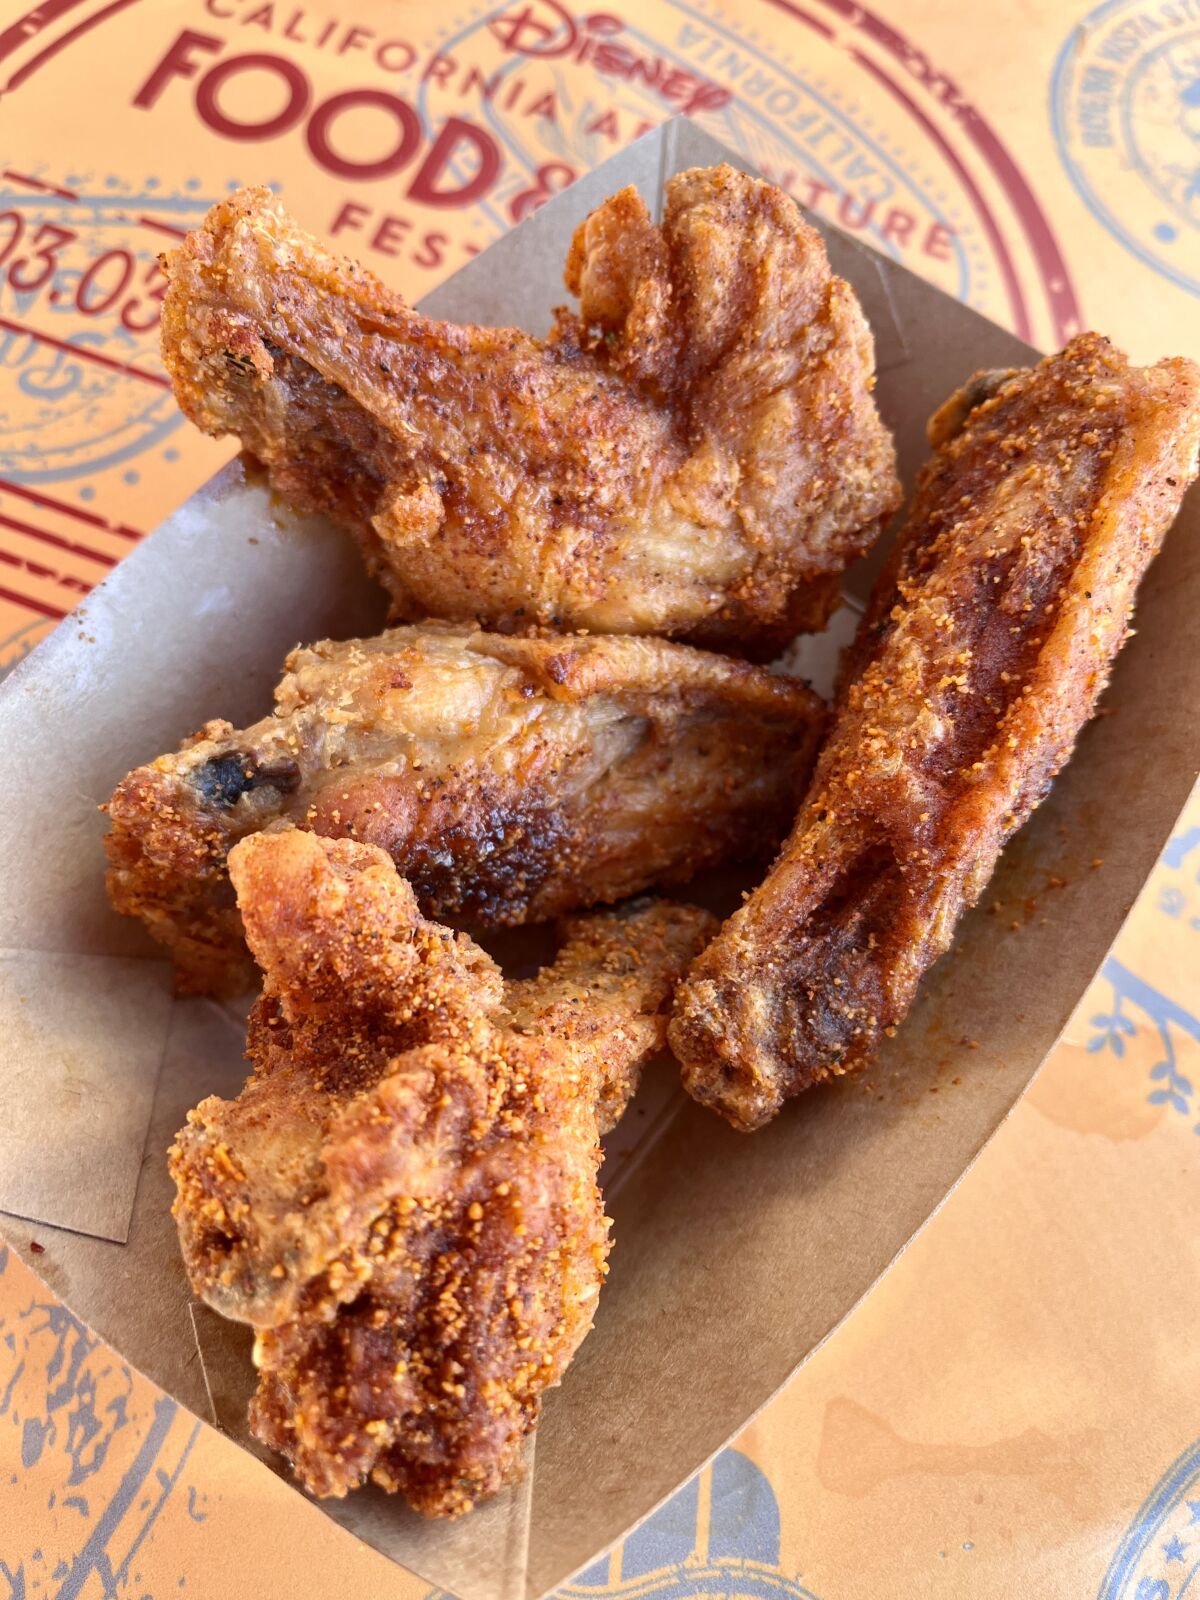 Smoked honey-habanero chicken wings from Cluck-a-Doodle-Moo.